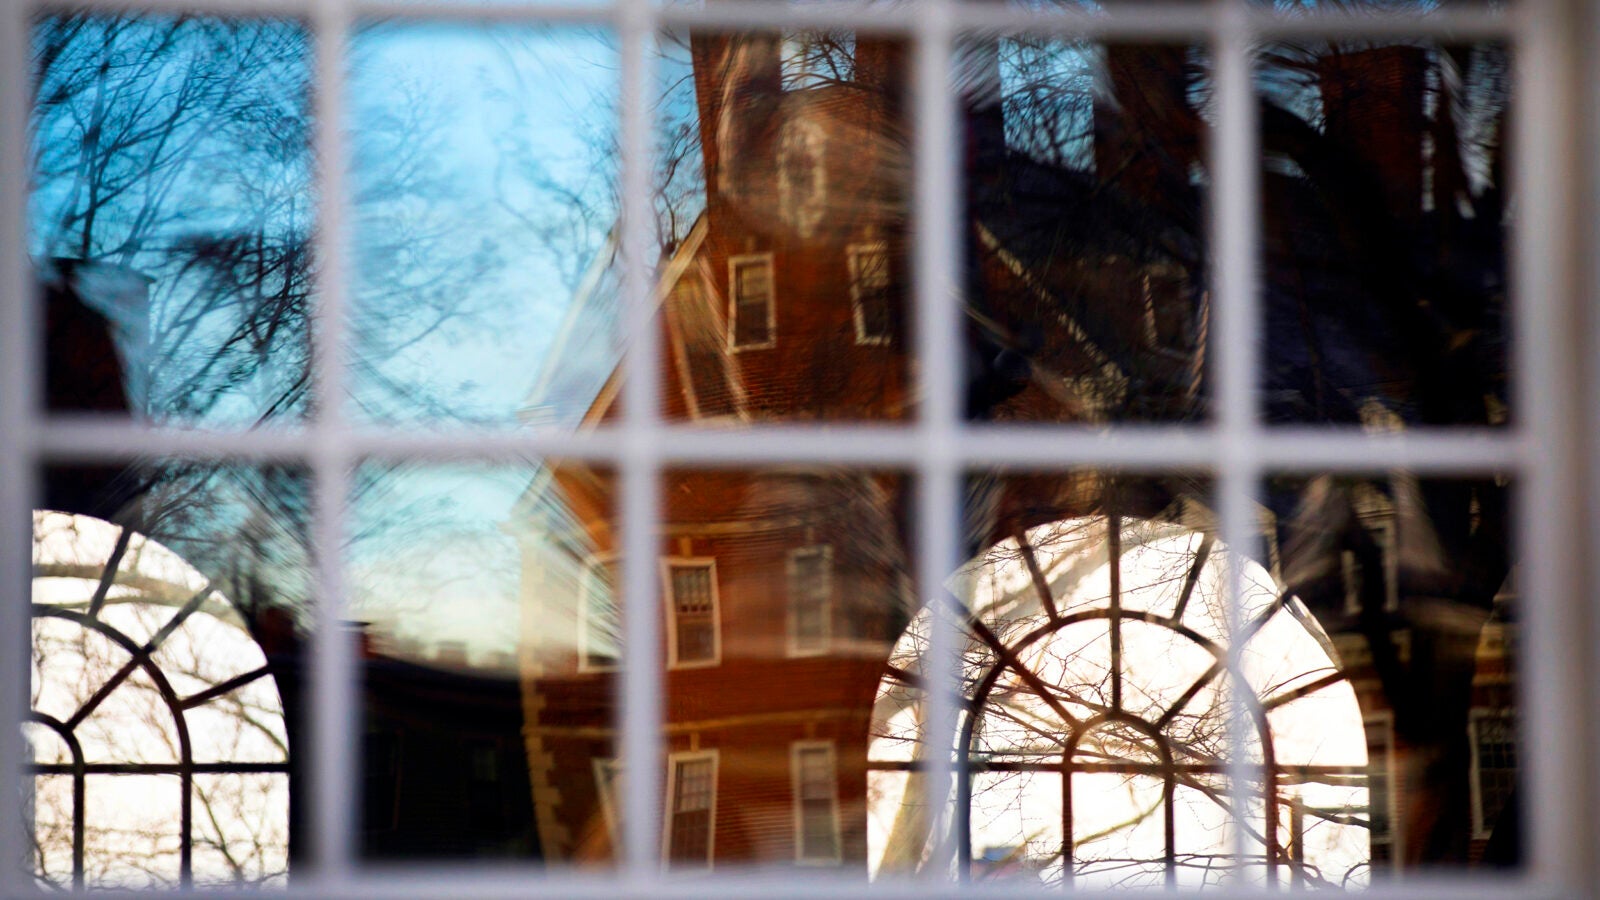 Kirkland House is reflected in the windows of Winthrop House.